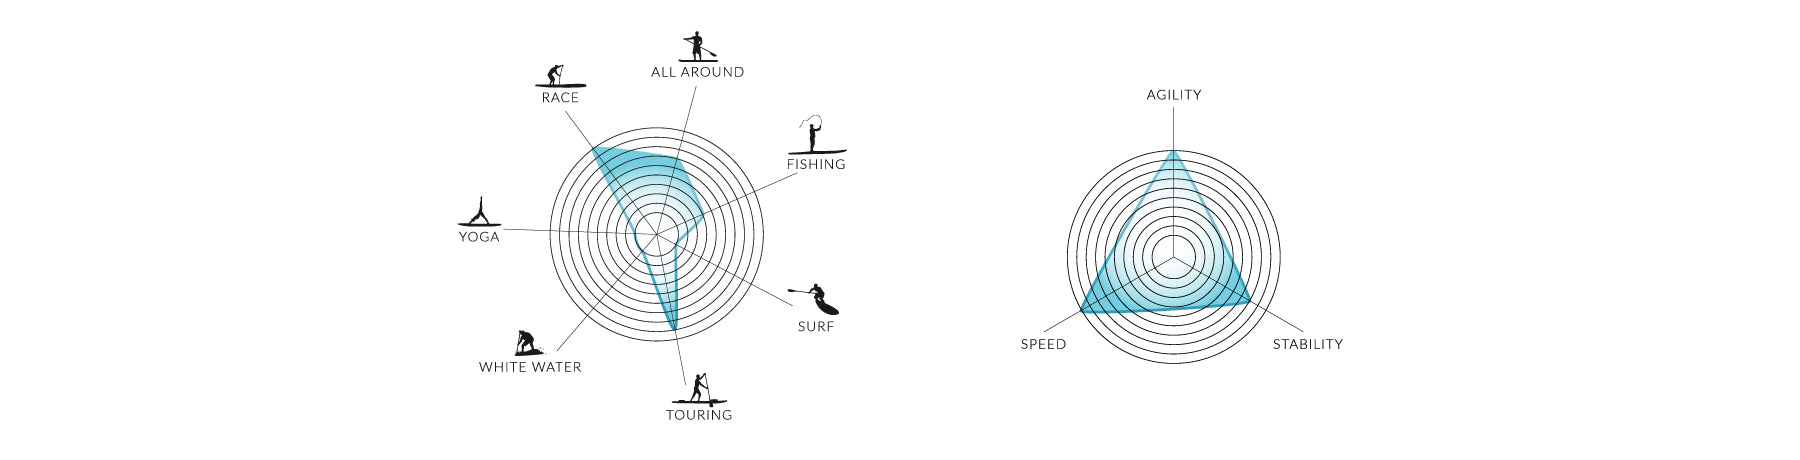 the cadence paddleboard performance graphic